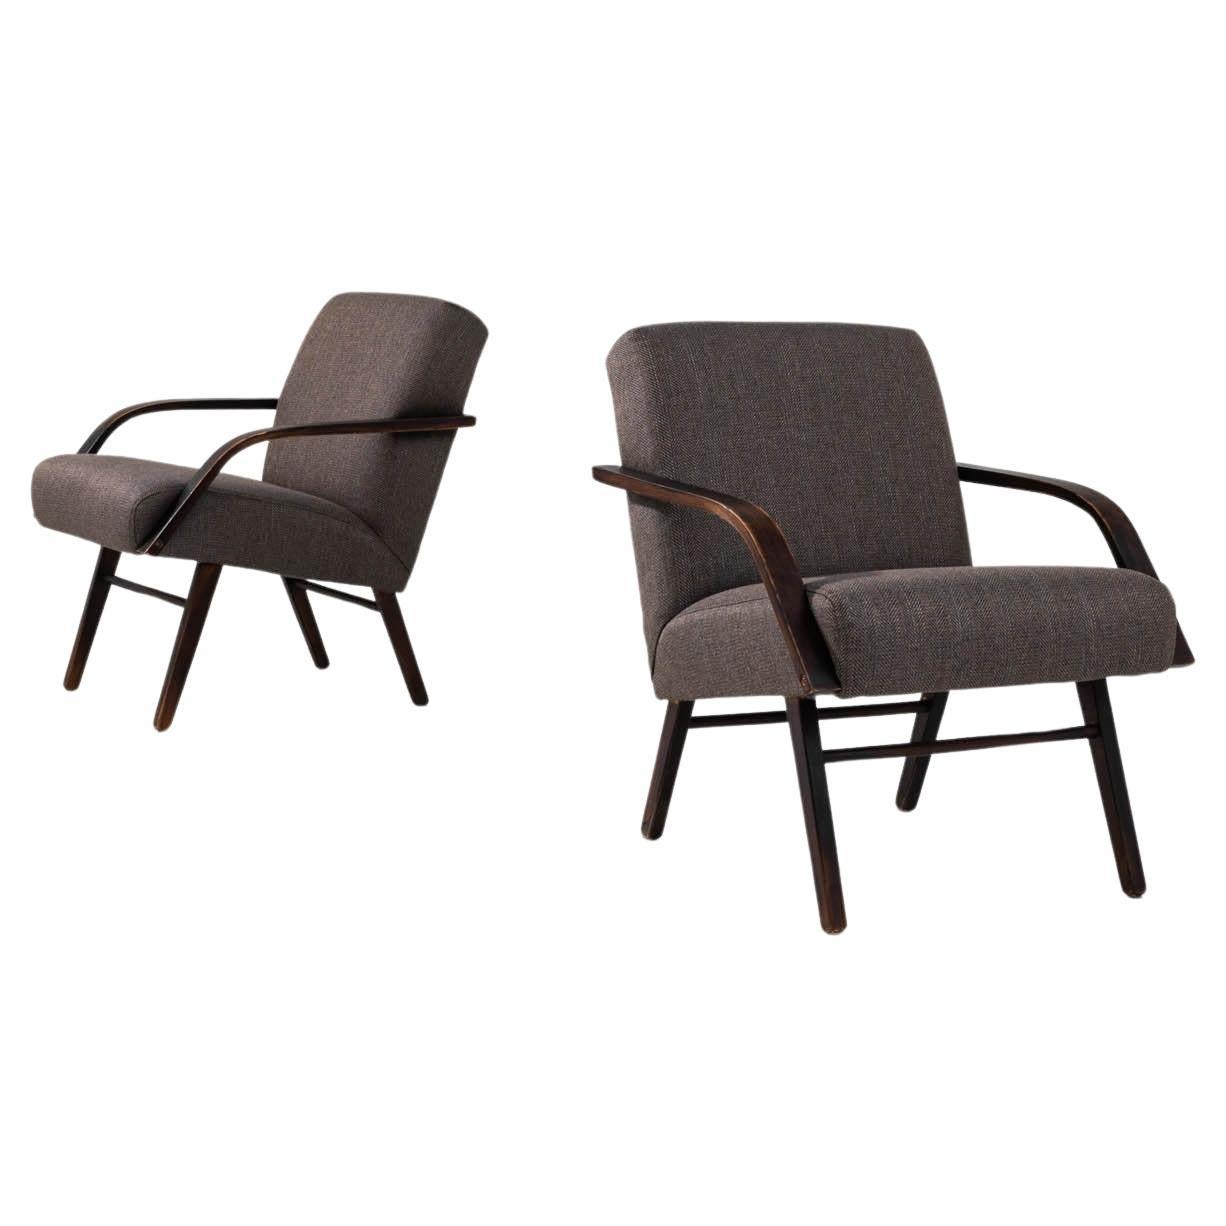 1960s Czech Upholstered Armchairs By TON, a Pair